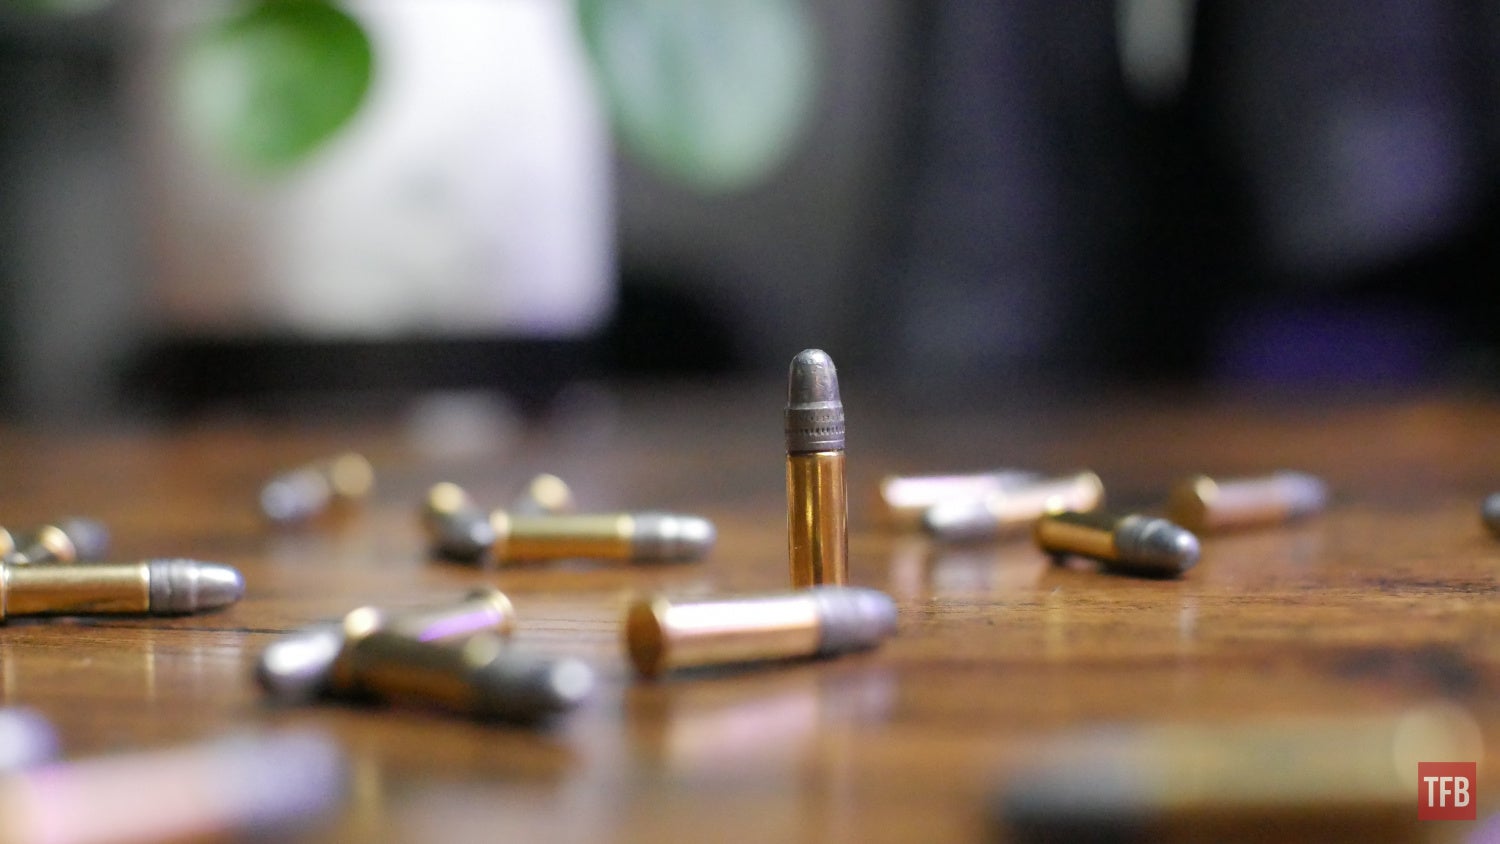 The Rimfire Report: Is Federal Automatch Secretly the Best Bulk Ammo?